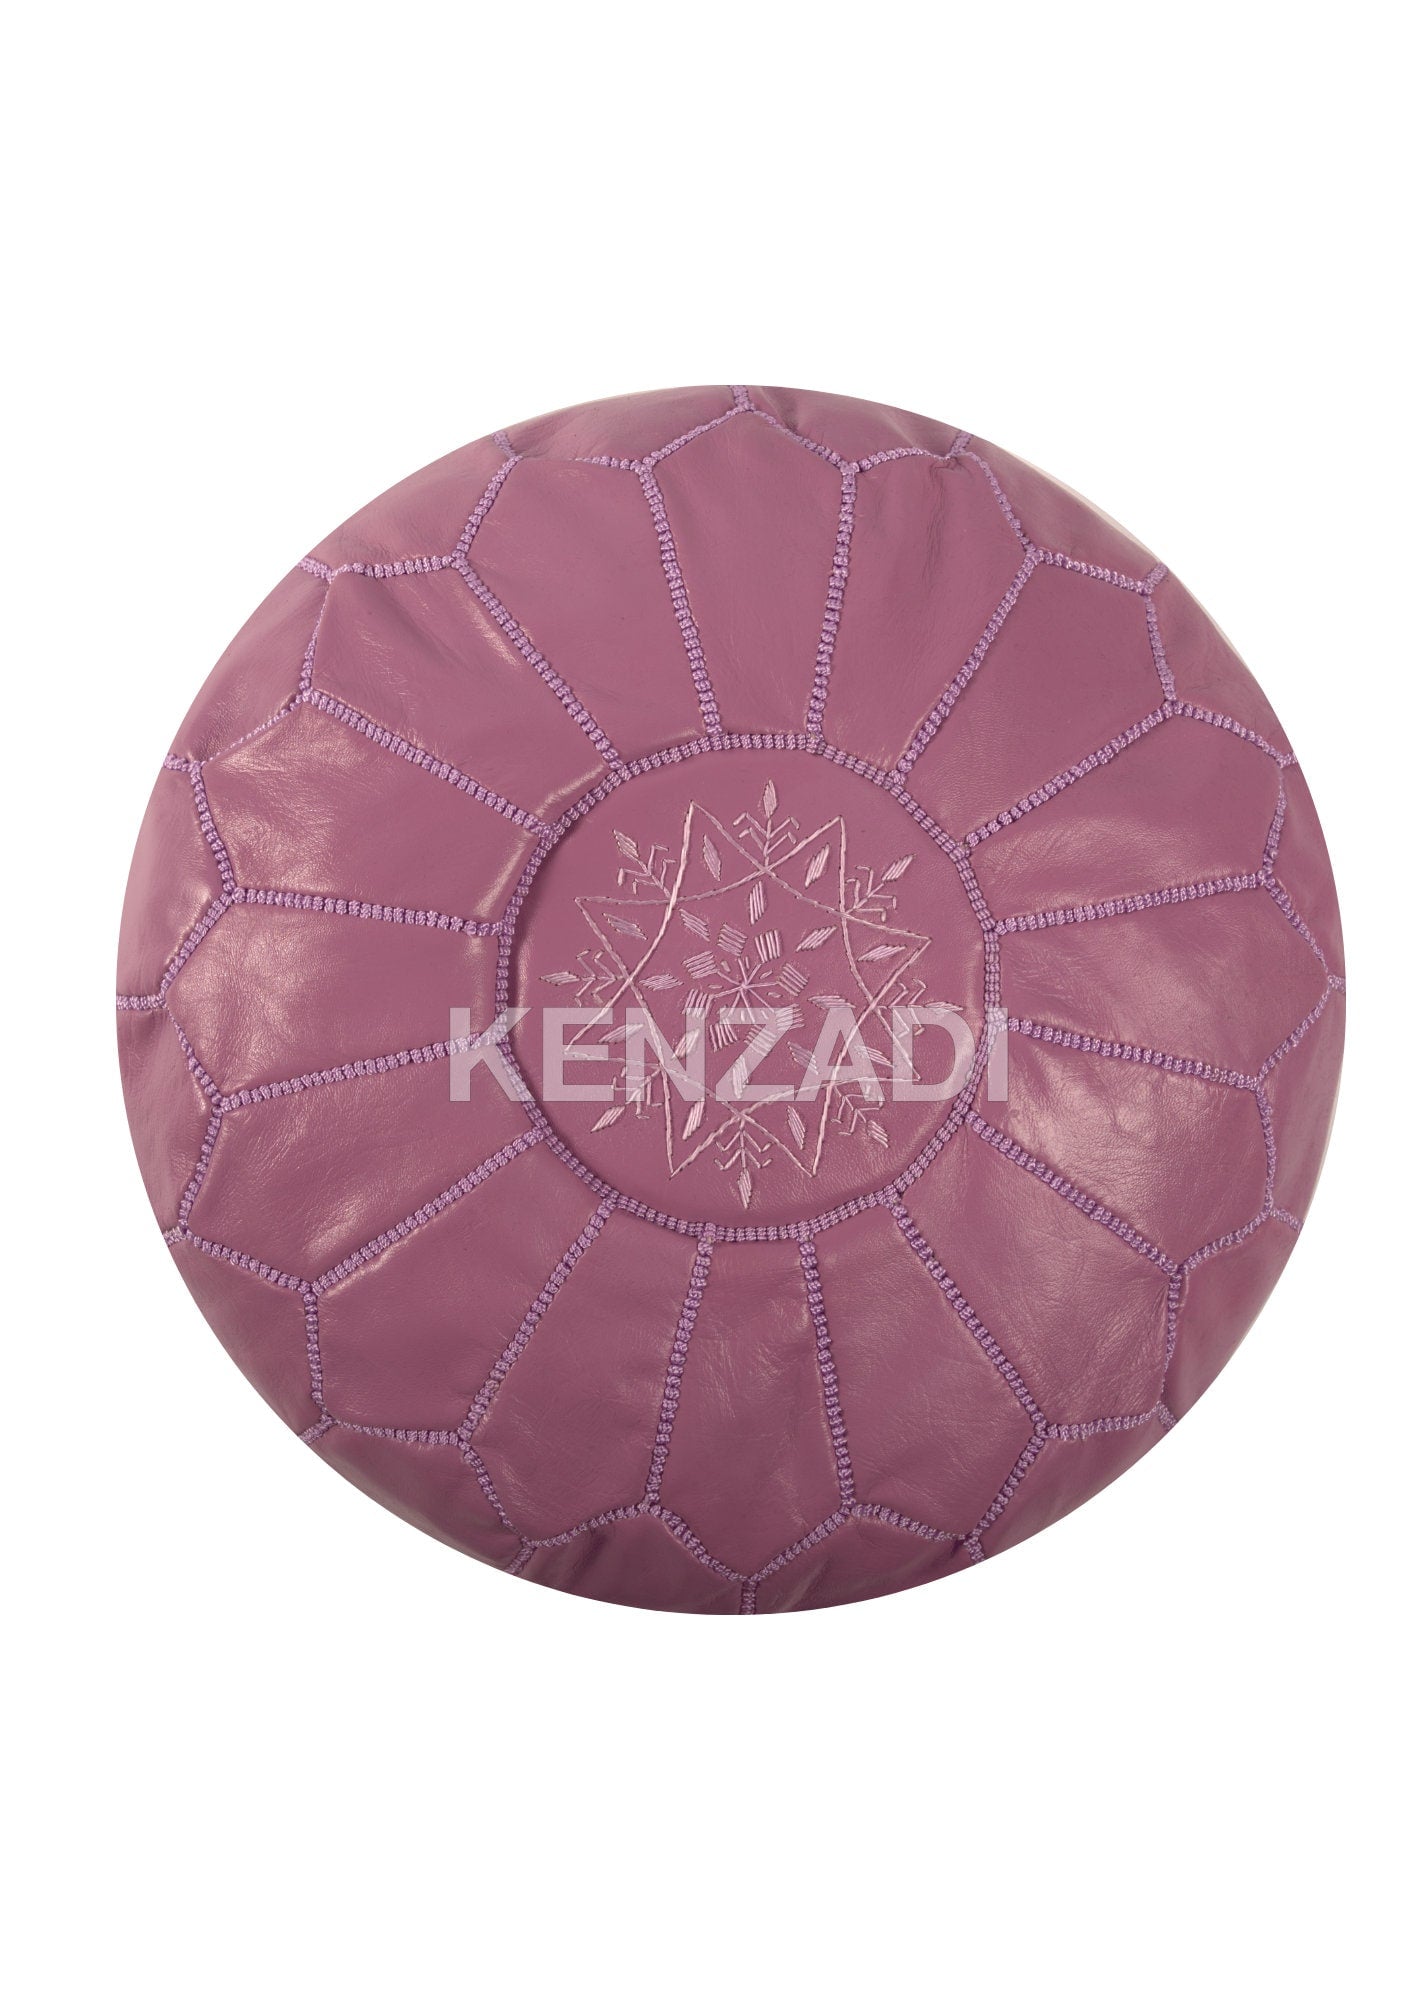 Moroccan leather pouf, round pouf, berber pouf, light purple pouf with purple embroidery by Kenzadi - Handmade by My Poufs